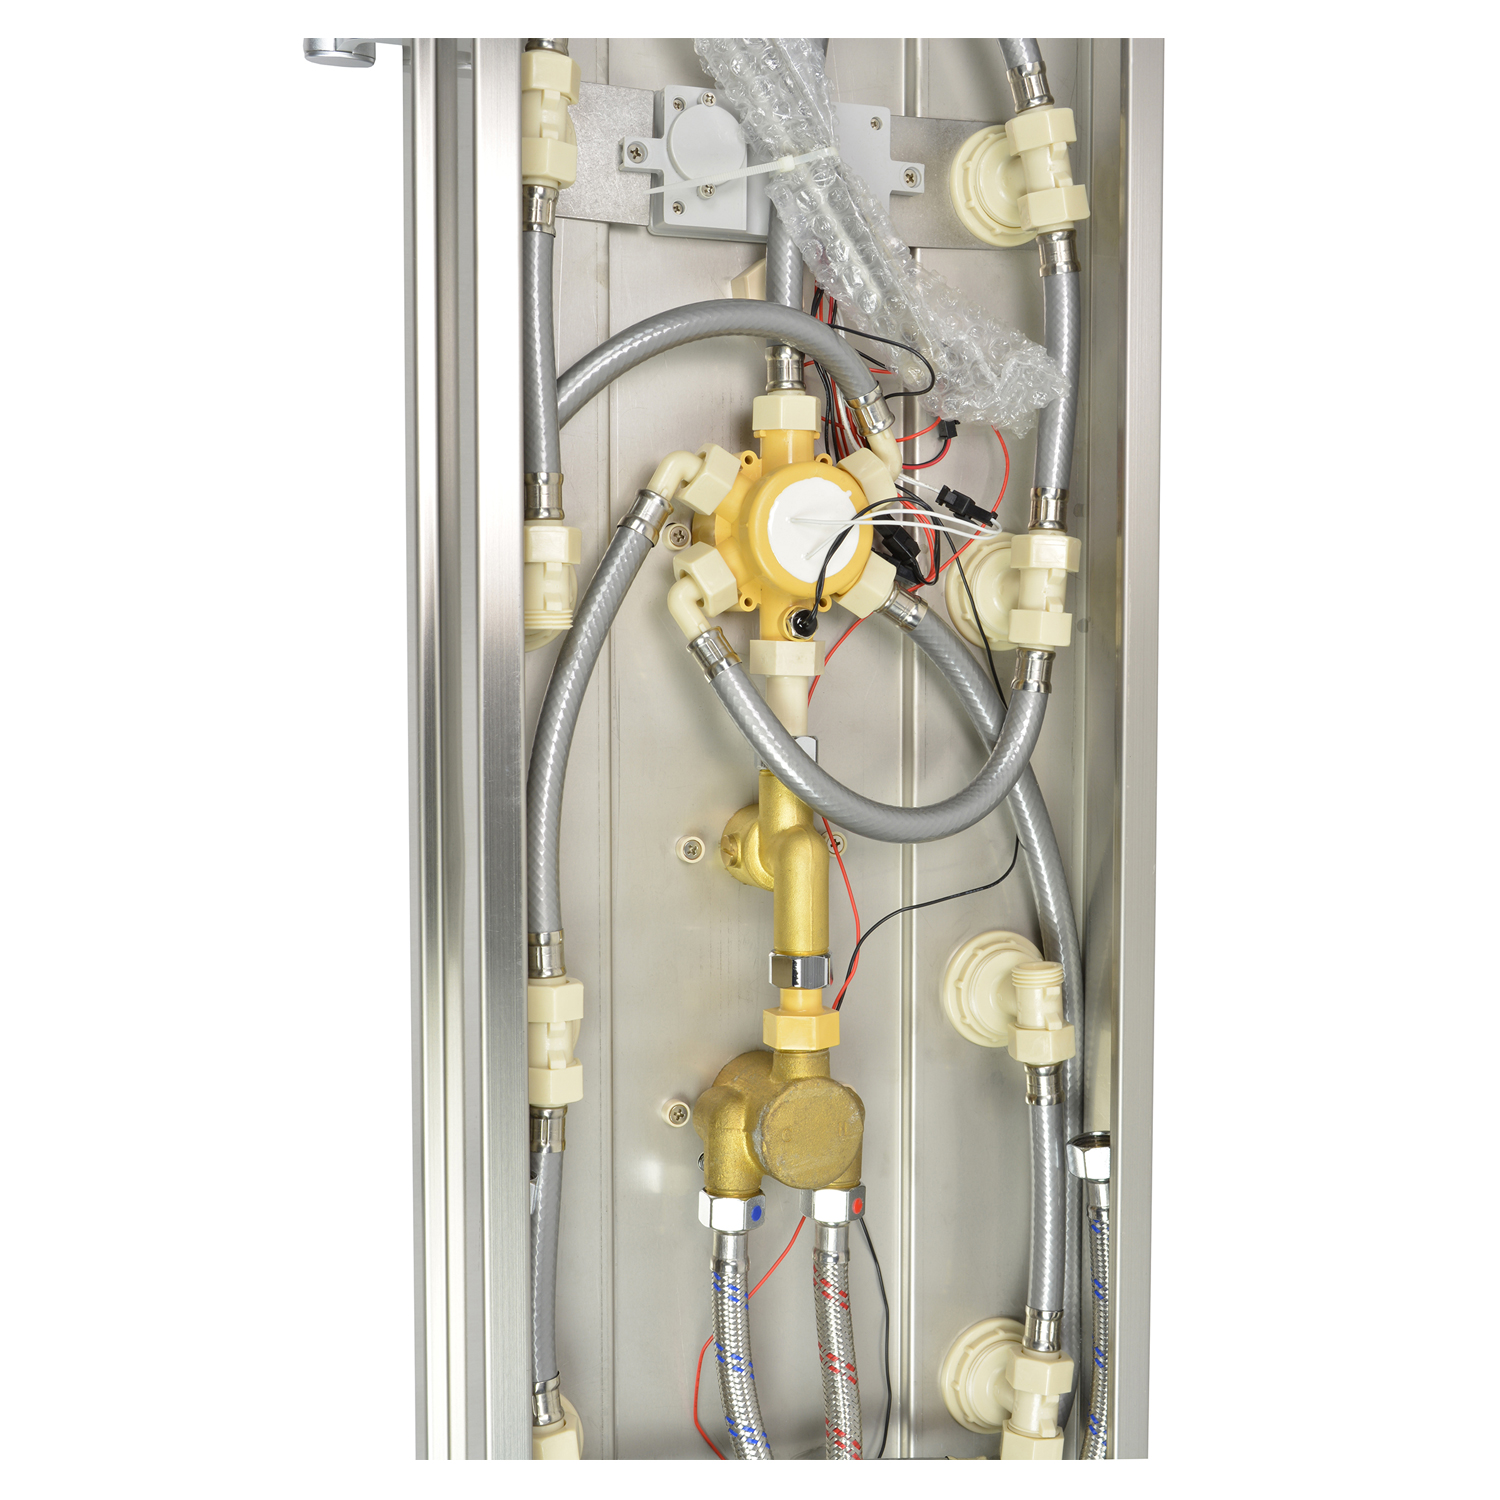 Blue Ocean 52” Stainless Steel SPV962332 Thermostatic